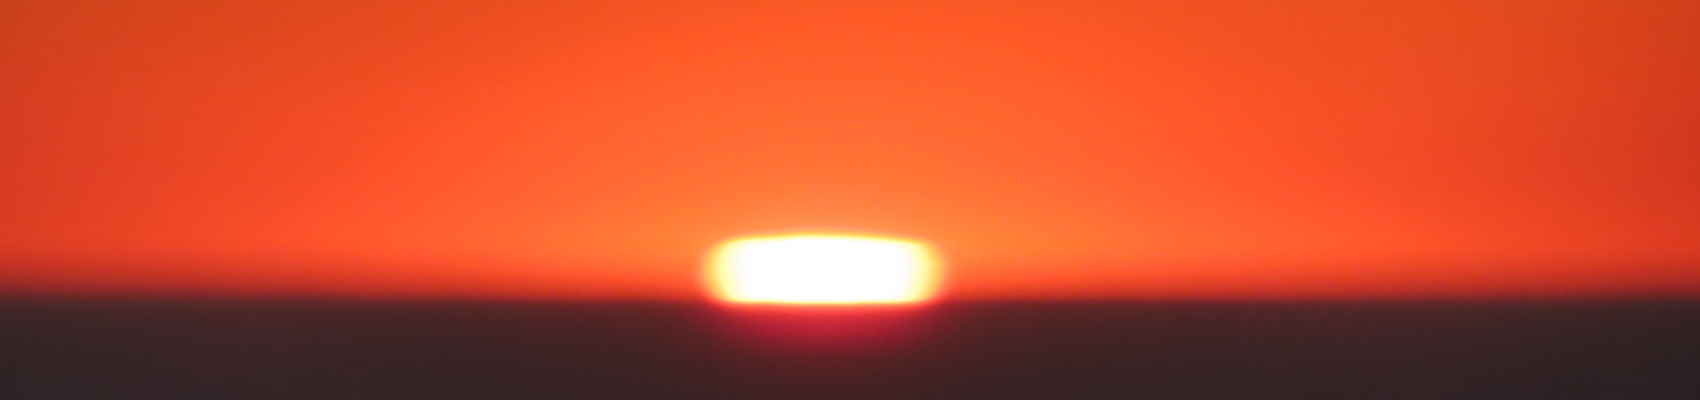 Abstract sunset. A blurry photo depicting a yellow lozenge nestled between a gradient of orange and a fuzzy darkness. Own work, 2023.